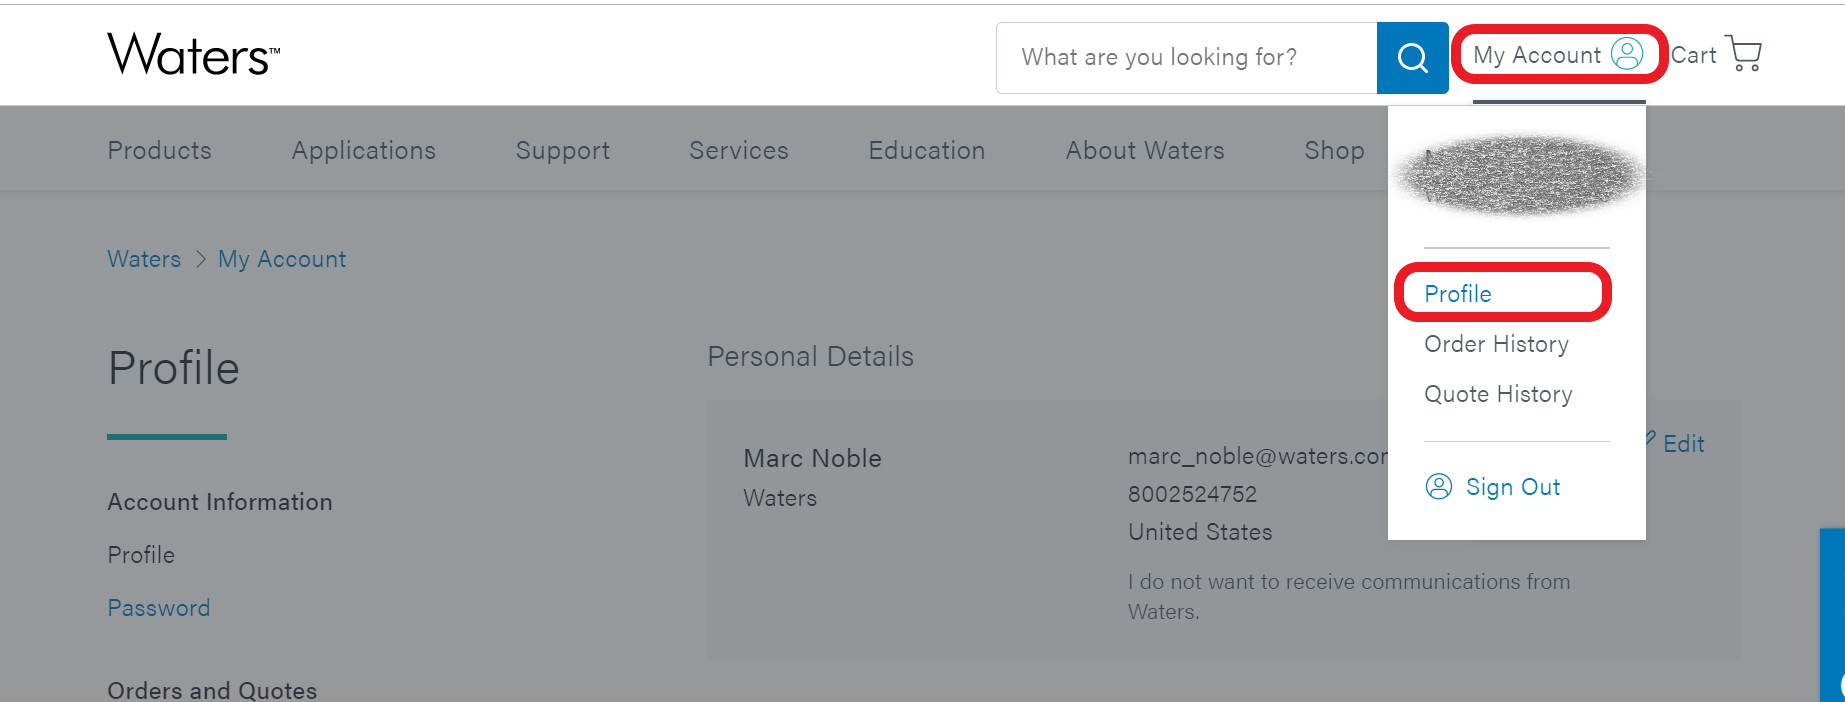 waters.com Profile.png